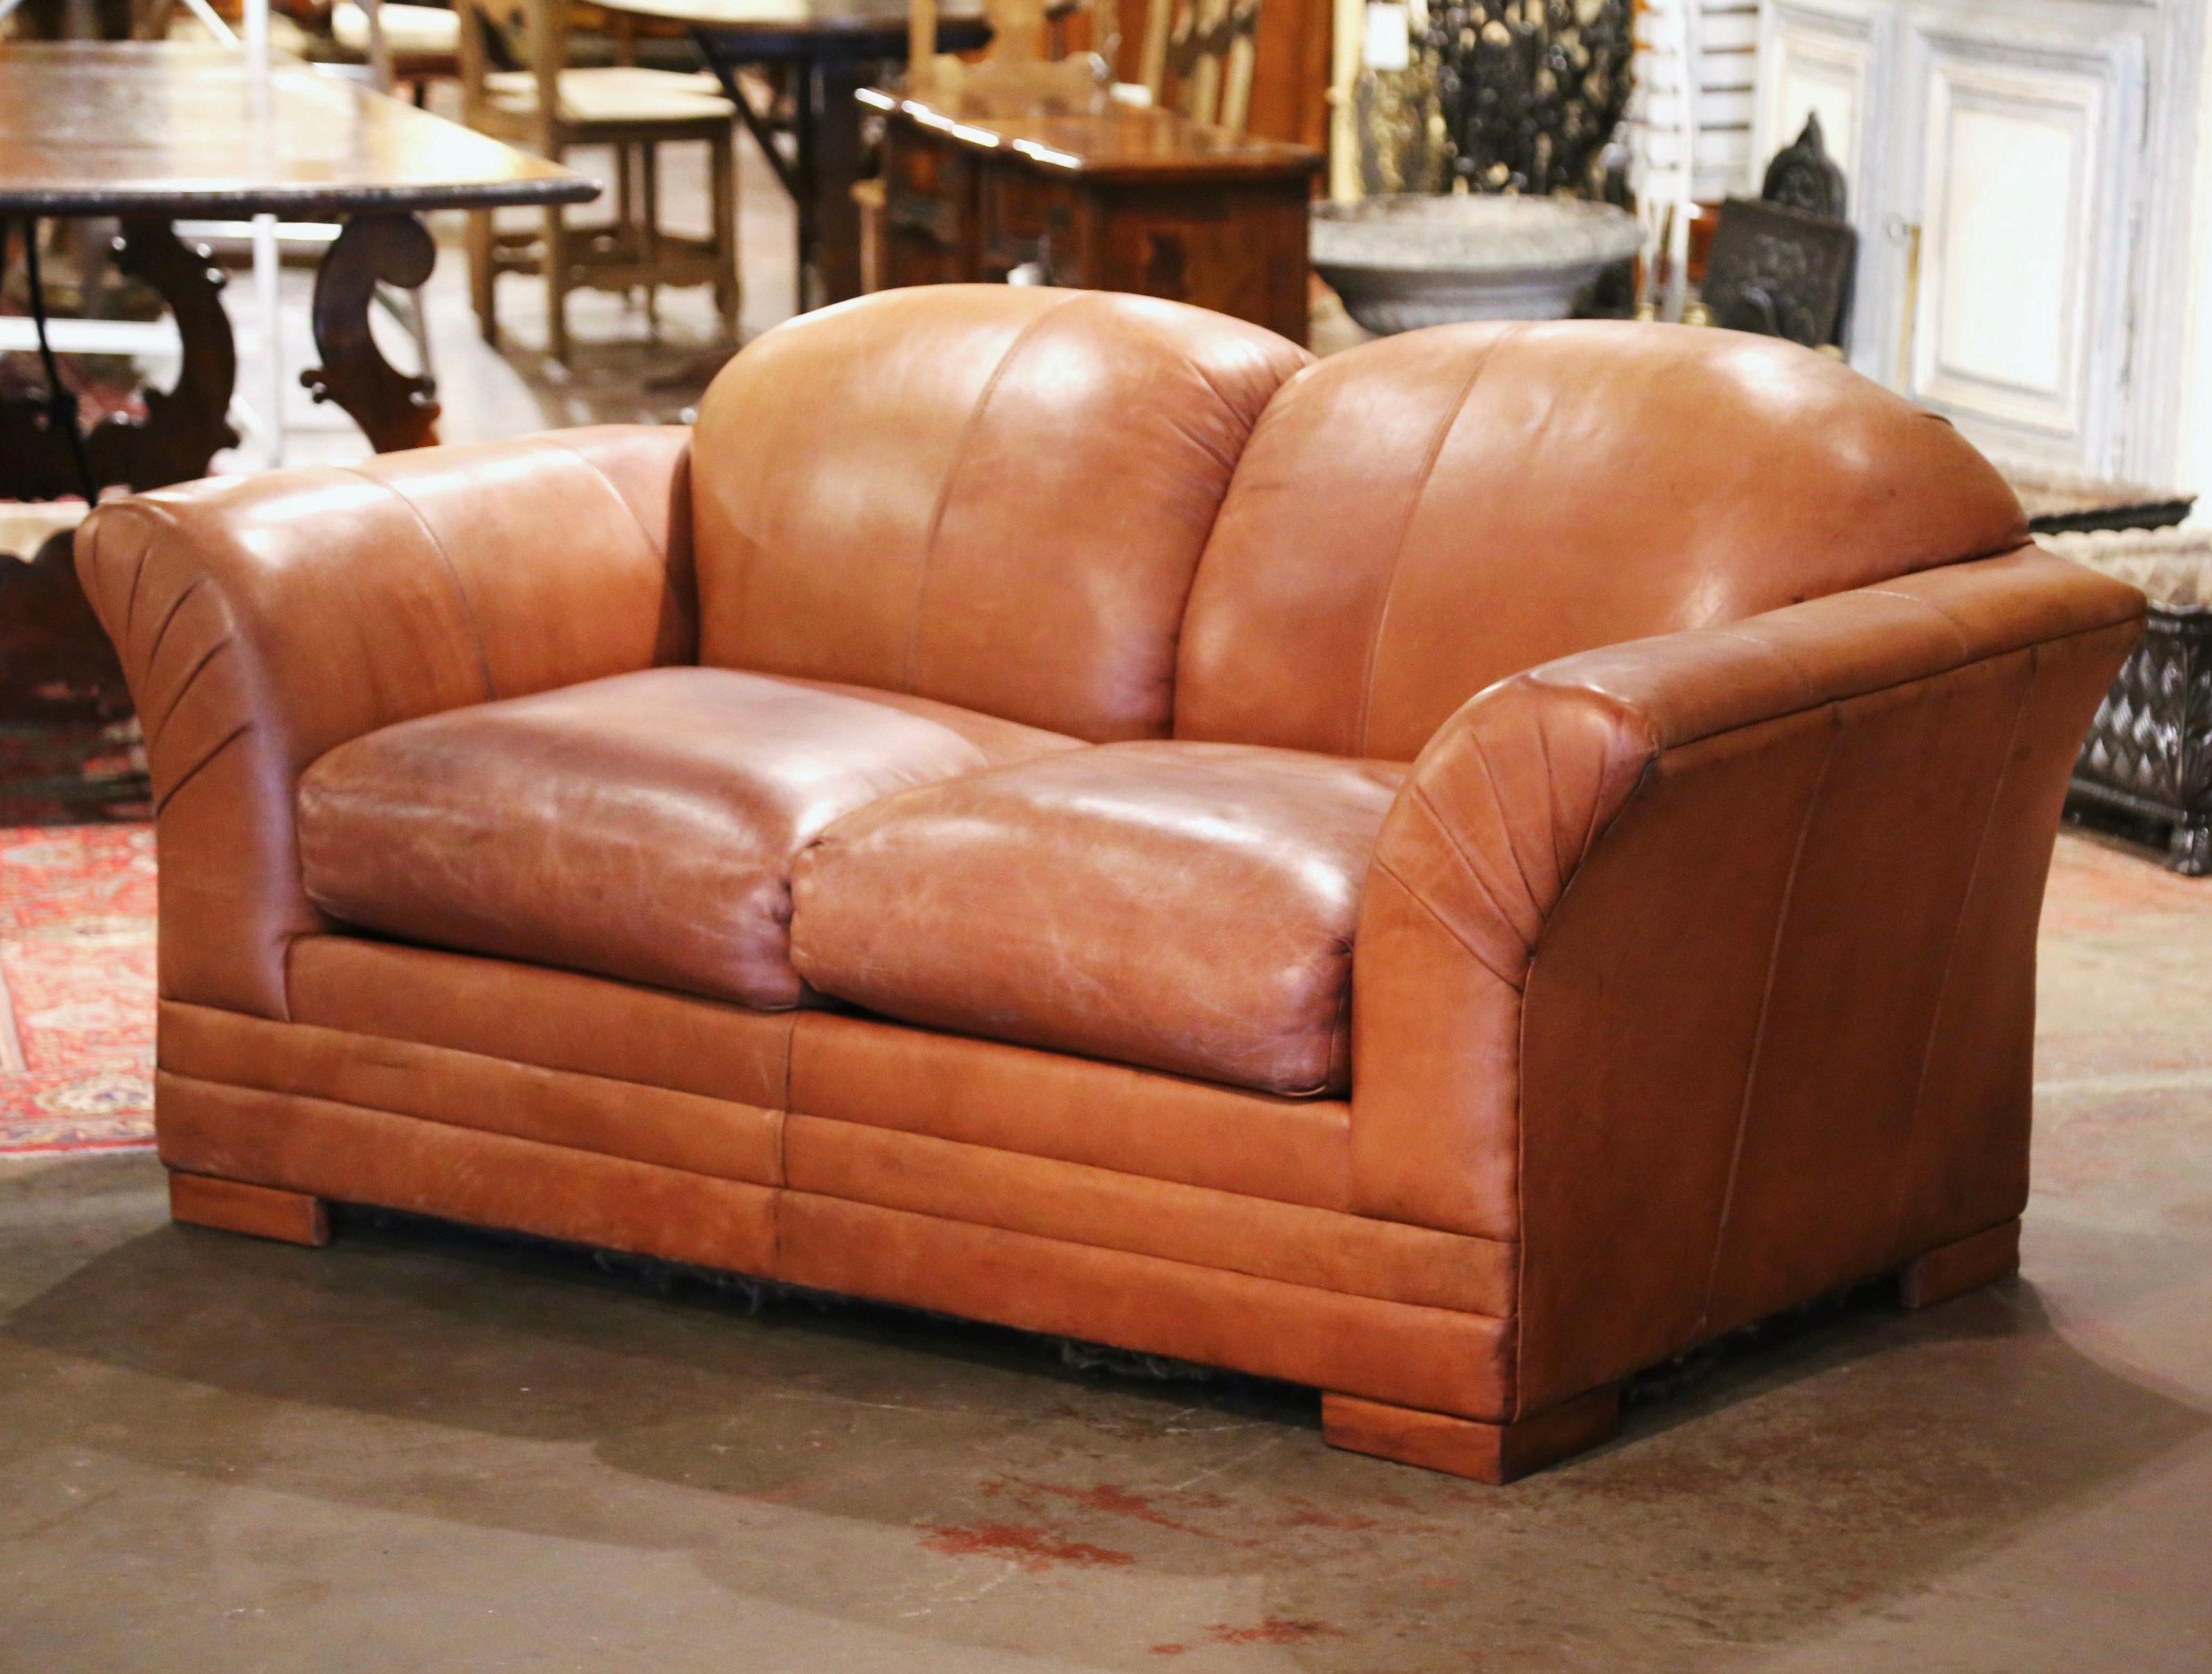 Hand-Crafted Vintage Mid-Century Sofa with Original Brown Leather For Sale